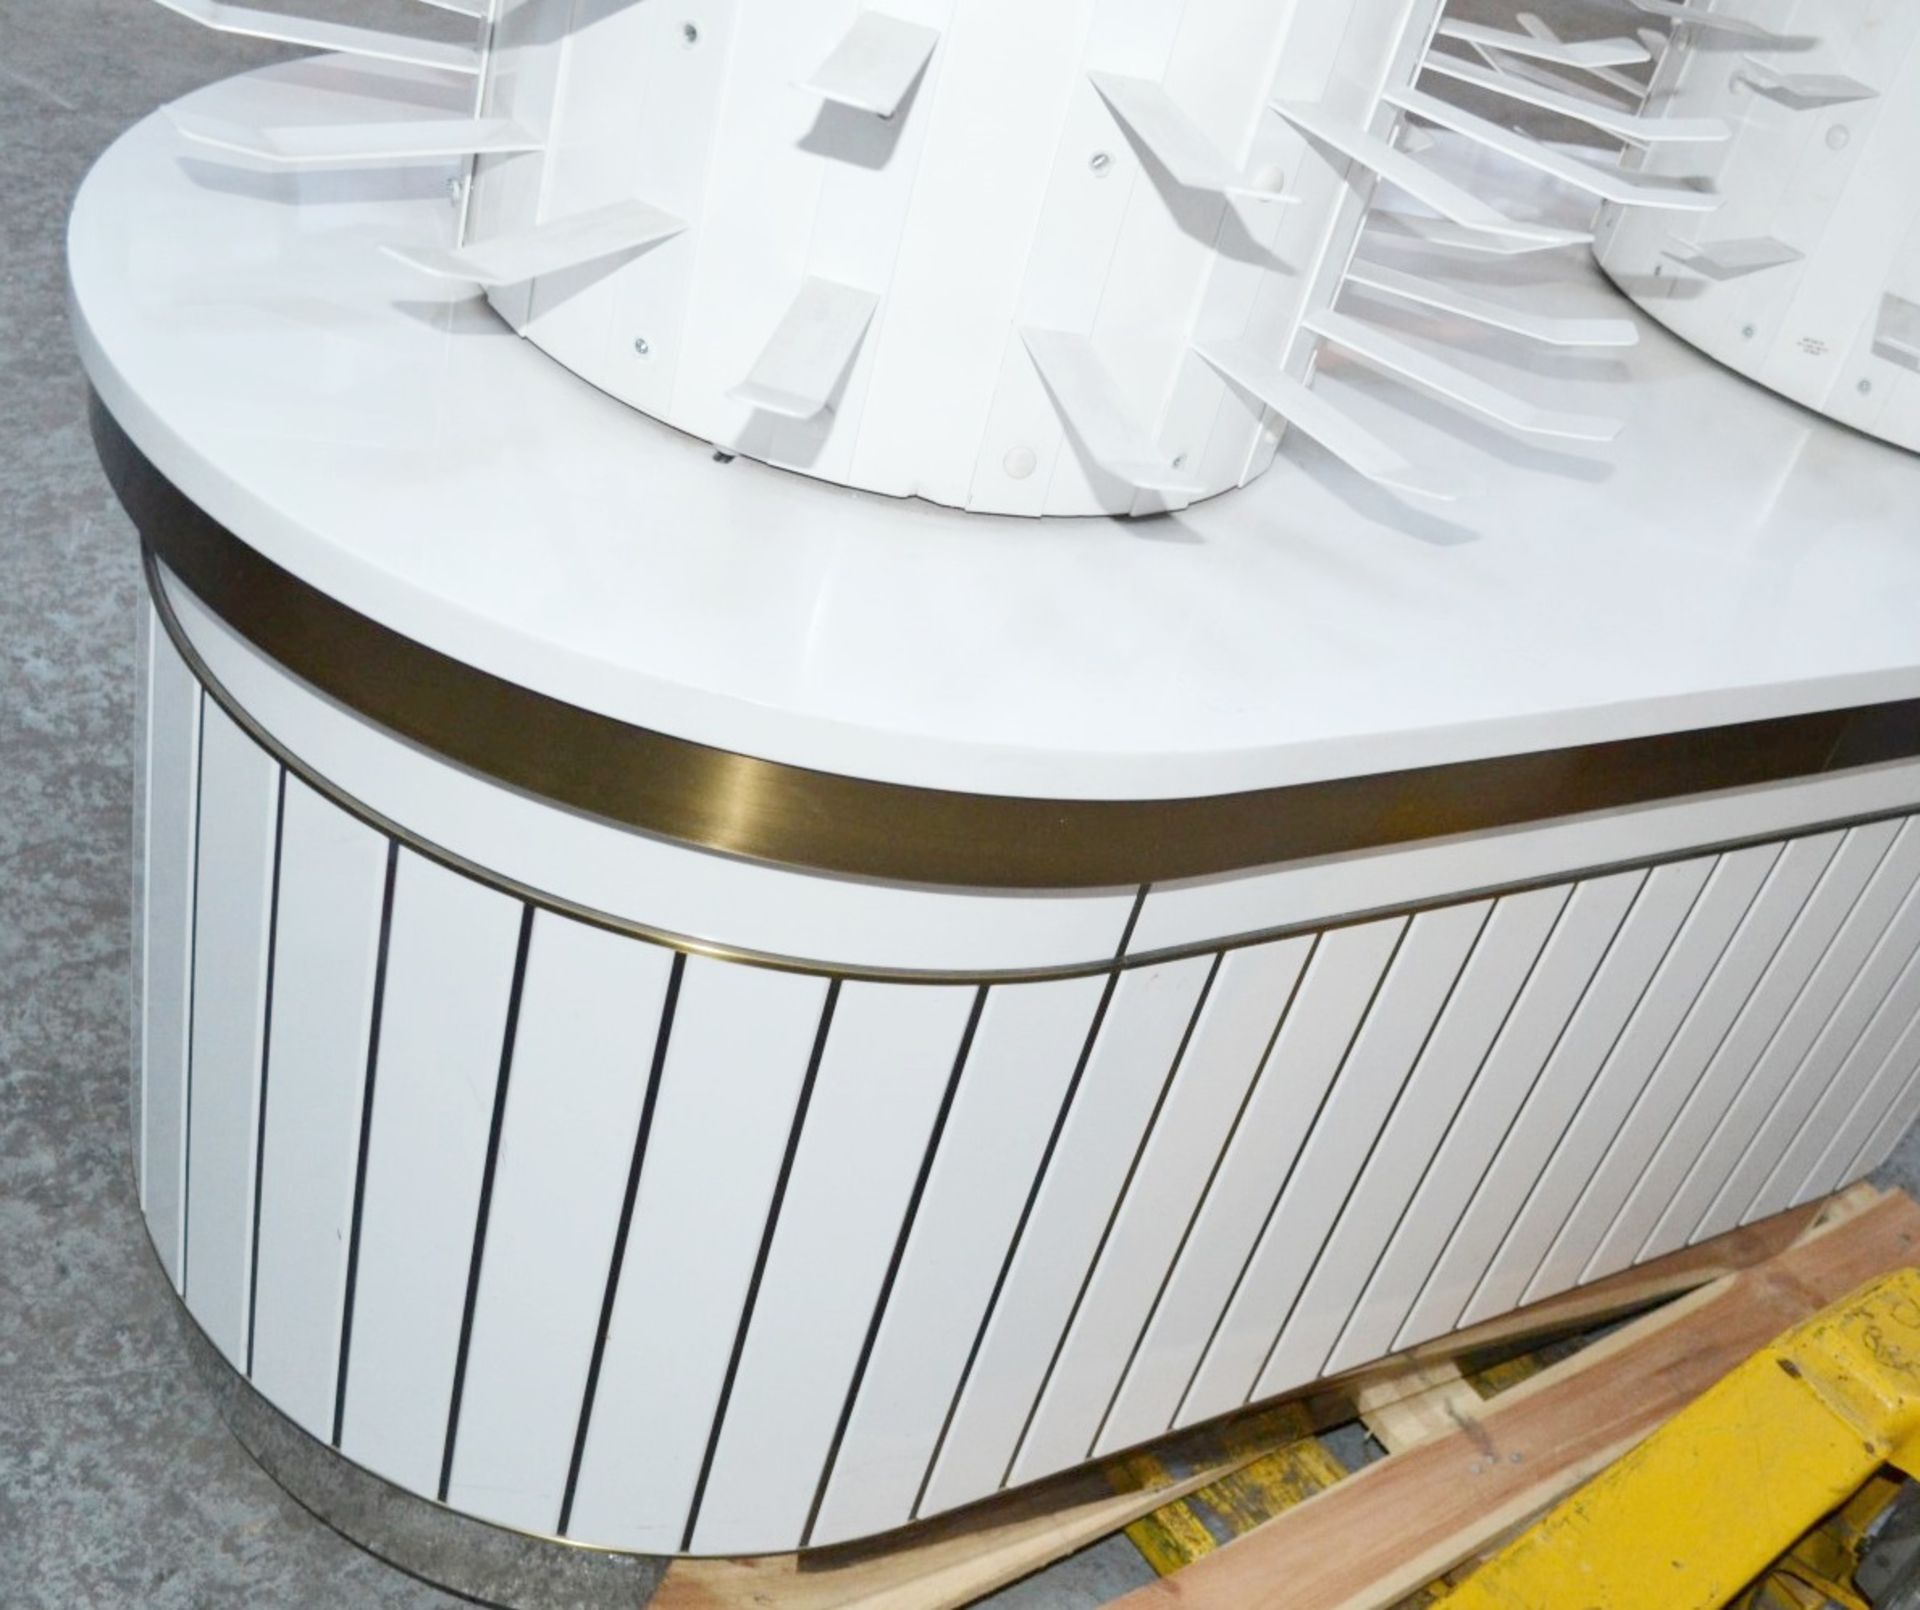 1 x Curved Cosmetics Shop Counter With Revolving Carousels In White - Colour: White - Dimensions: - Image 8 of 8